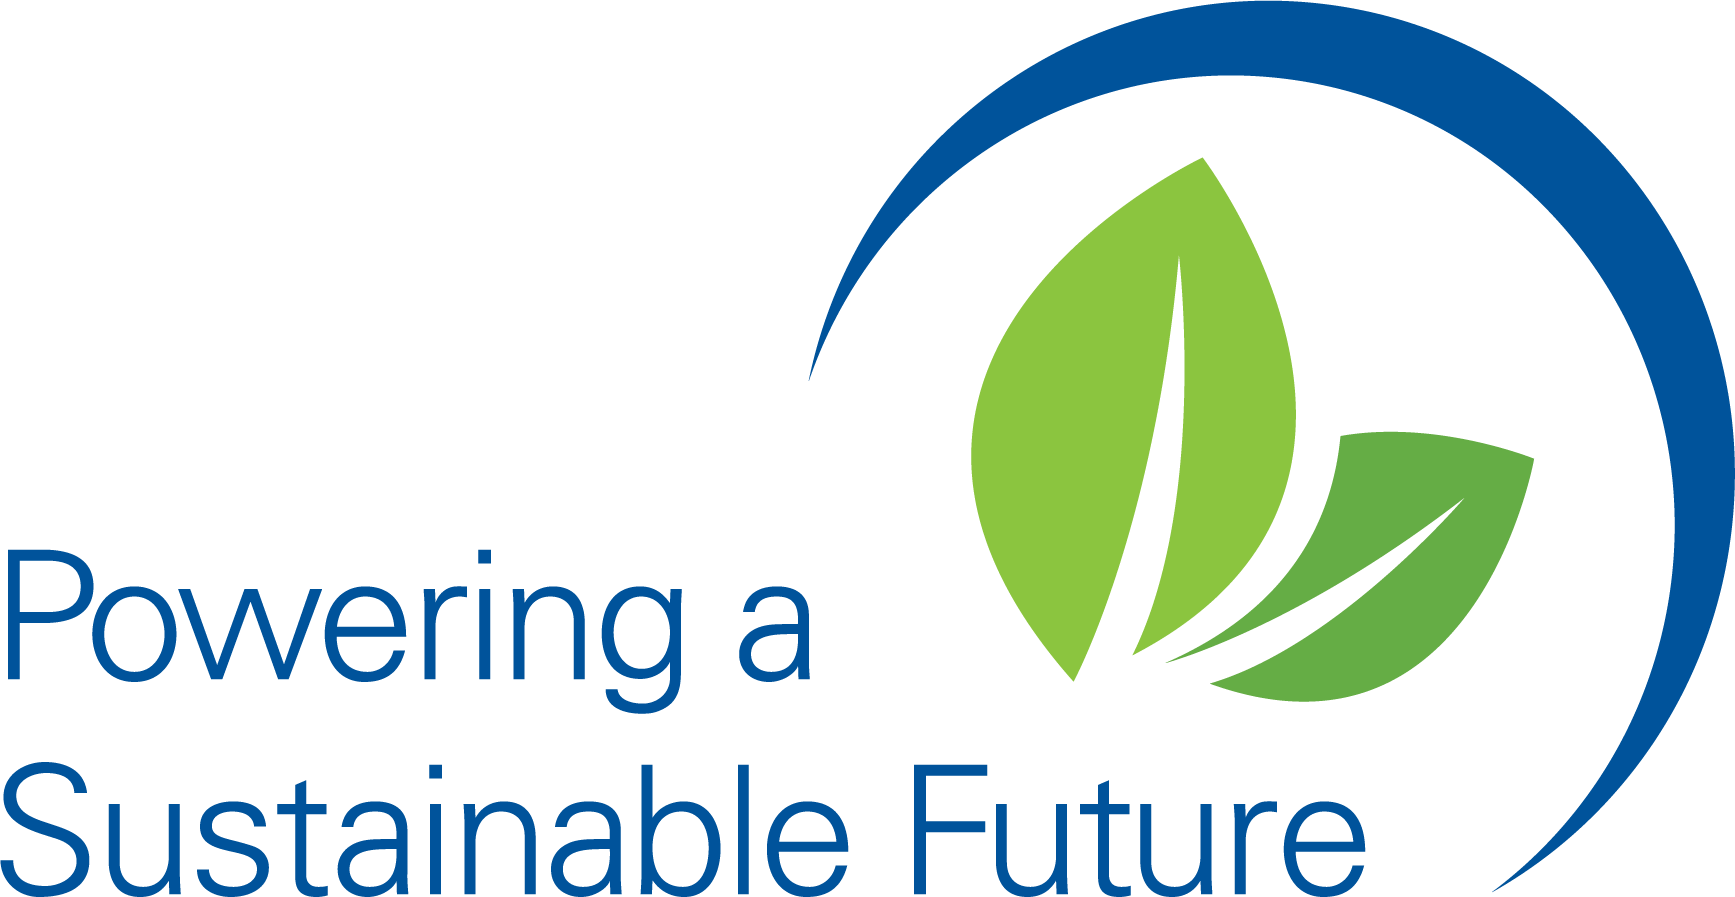 Powering a Sustainable Future